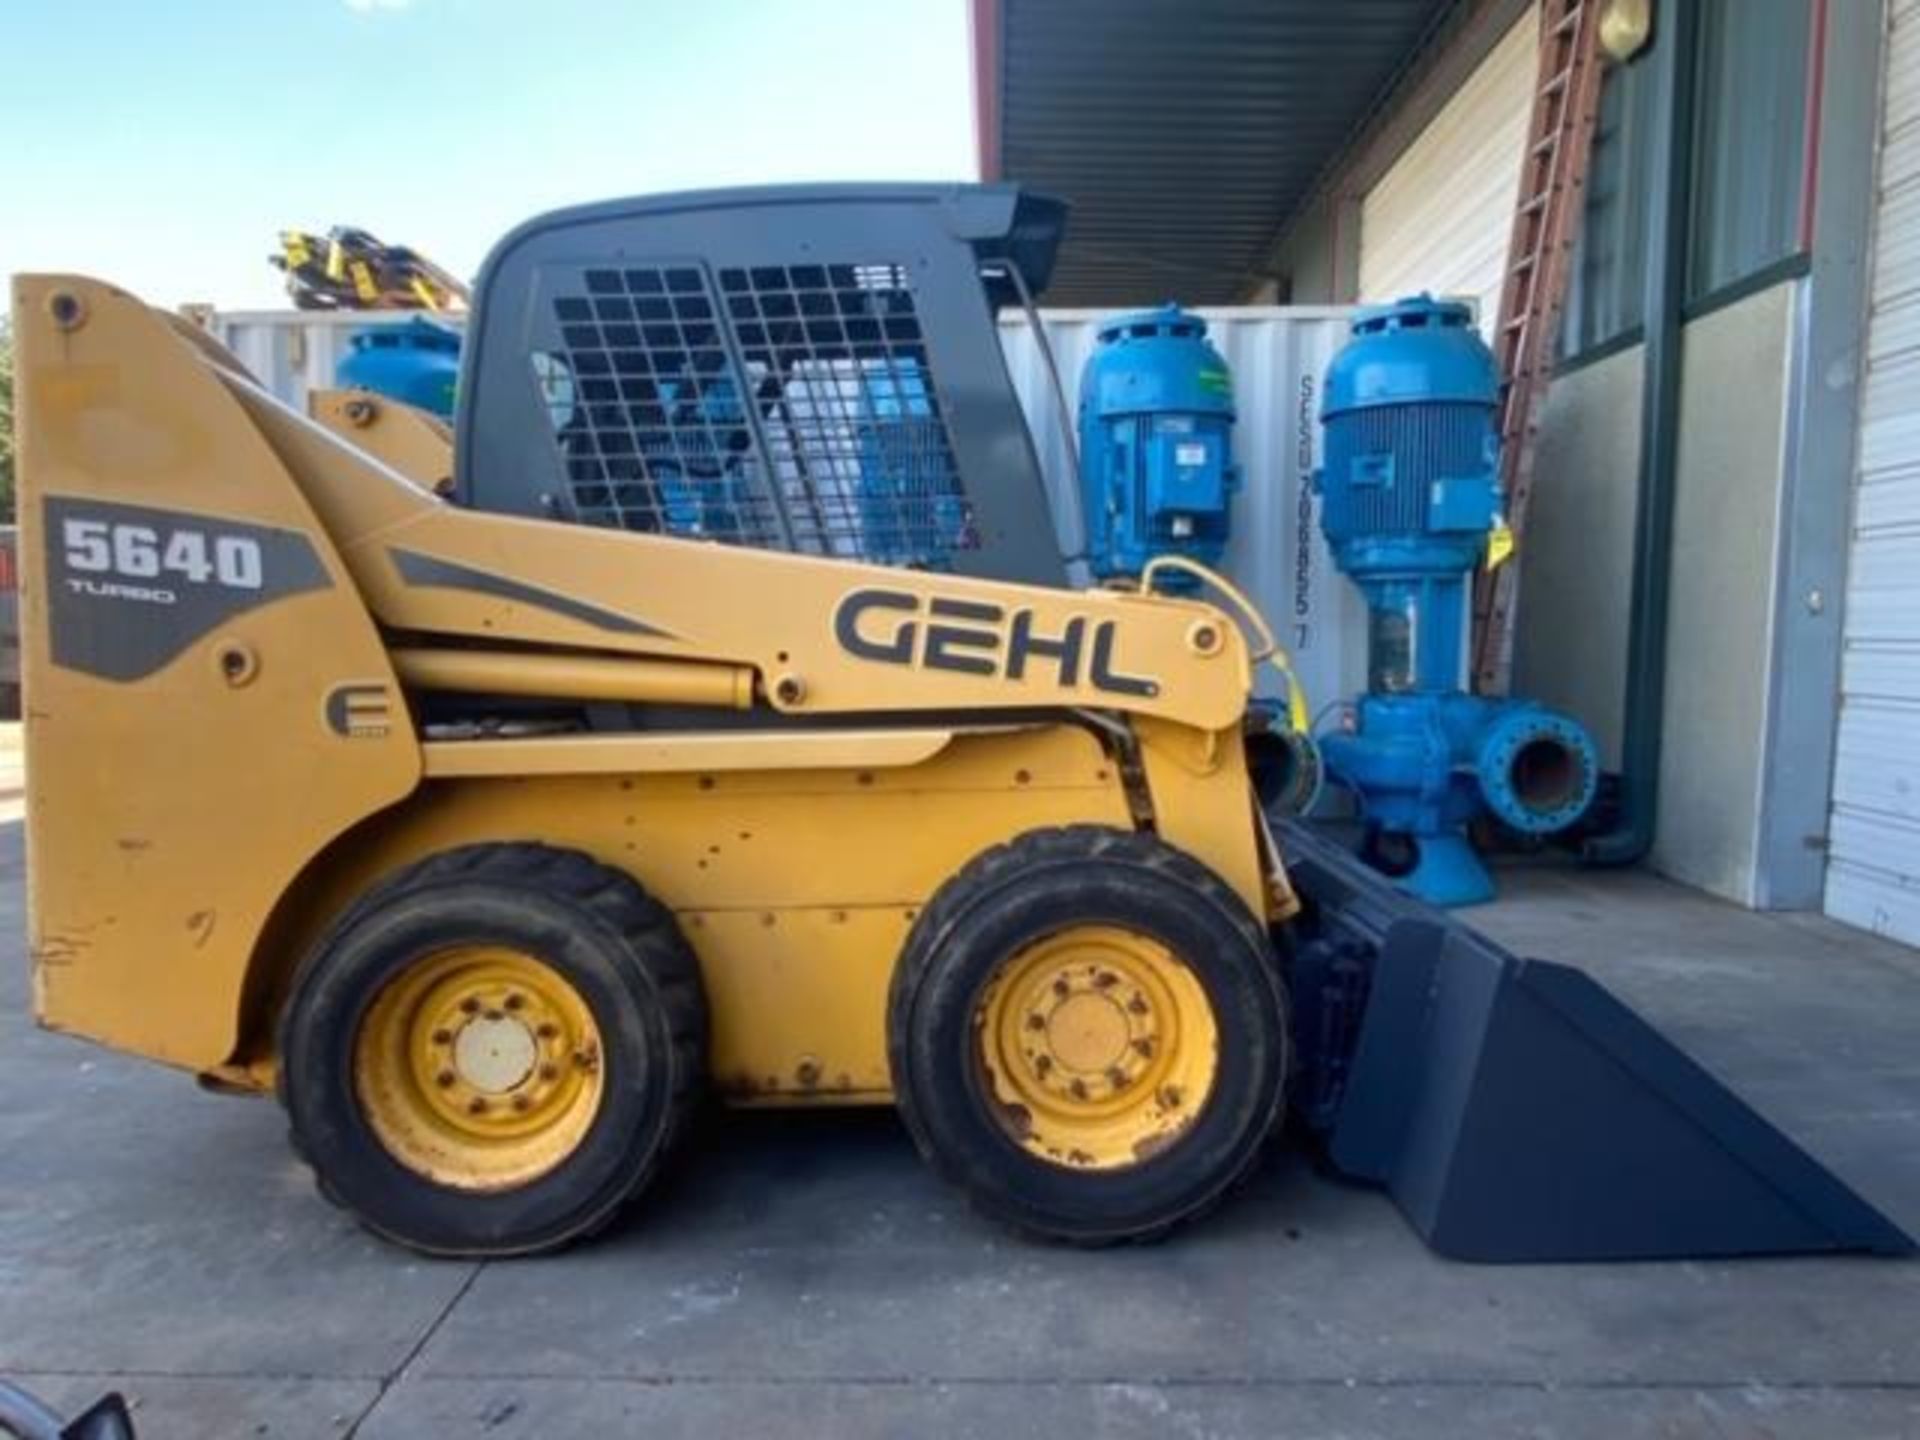 2010 GEHL 5640 TIRBO DIESEL SKID STEER WITH BUCKET ATTACHMENT, RUNS AND OPERATES - Image 2 of 7